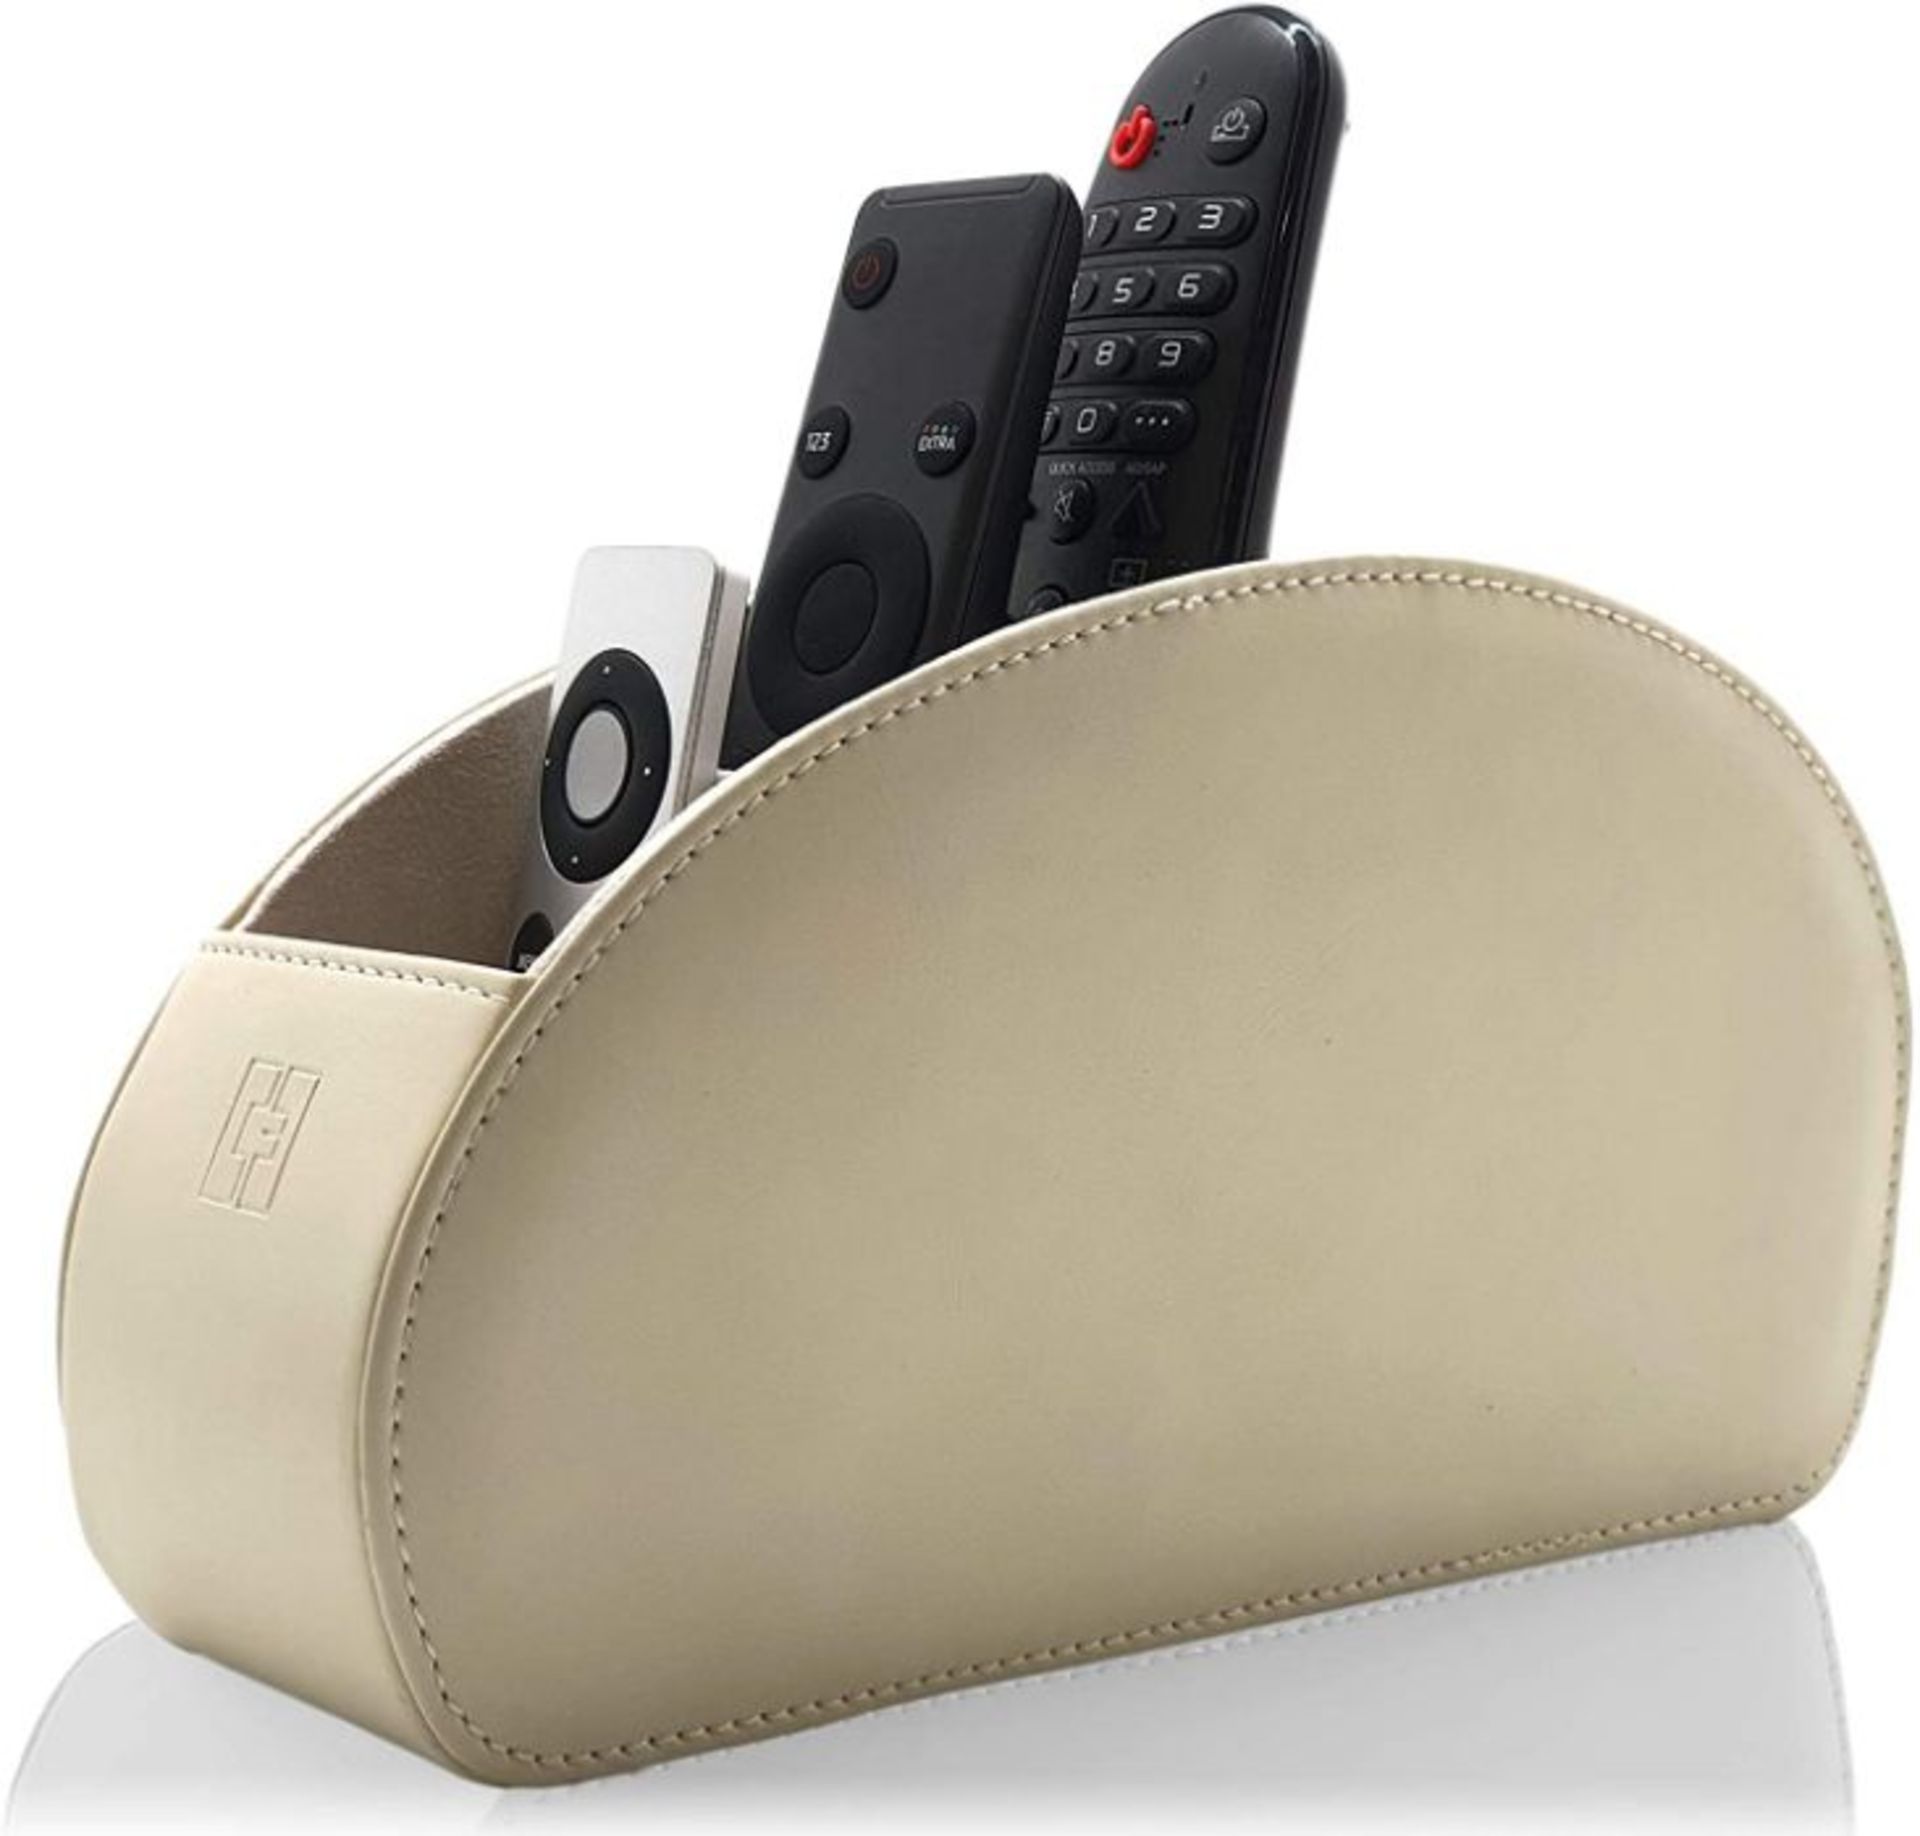 Connected Remote Control Holder (CREAM) (25523/26)